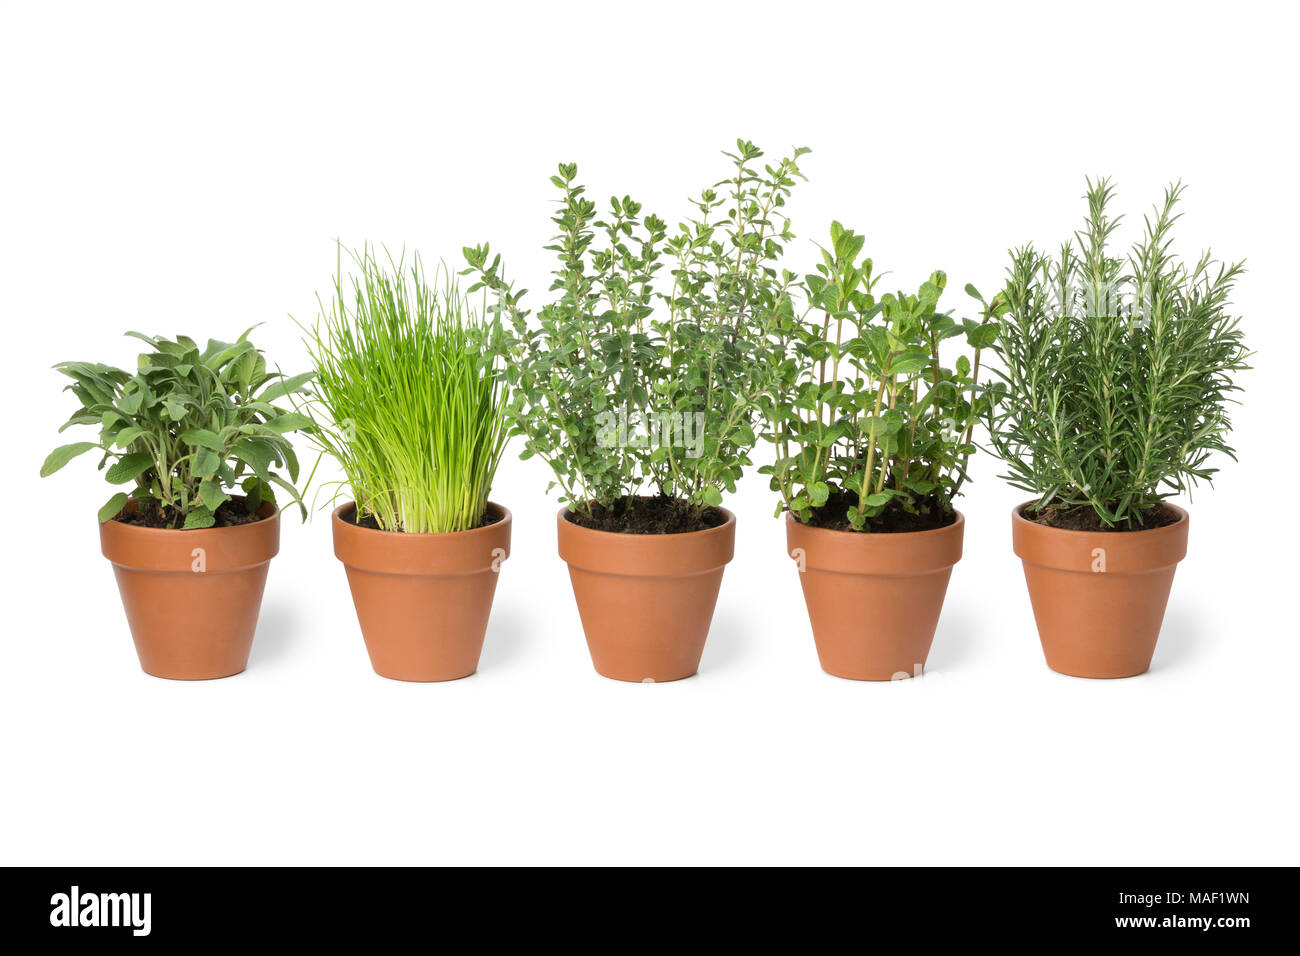 Row of brown terra cotta pots with fresh green kitchen herbs, sage,mint,rosemary,oregano and chives isolated on white background Stock Photo